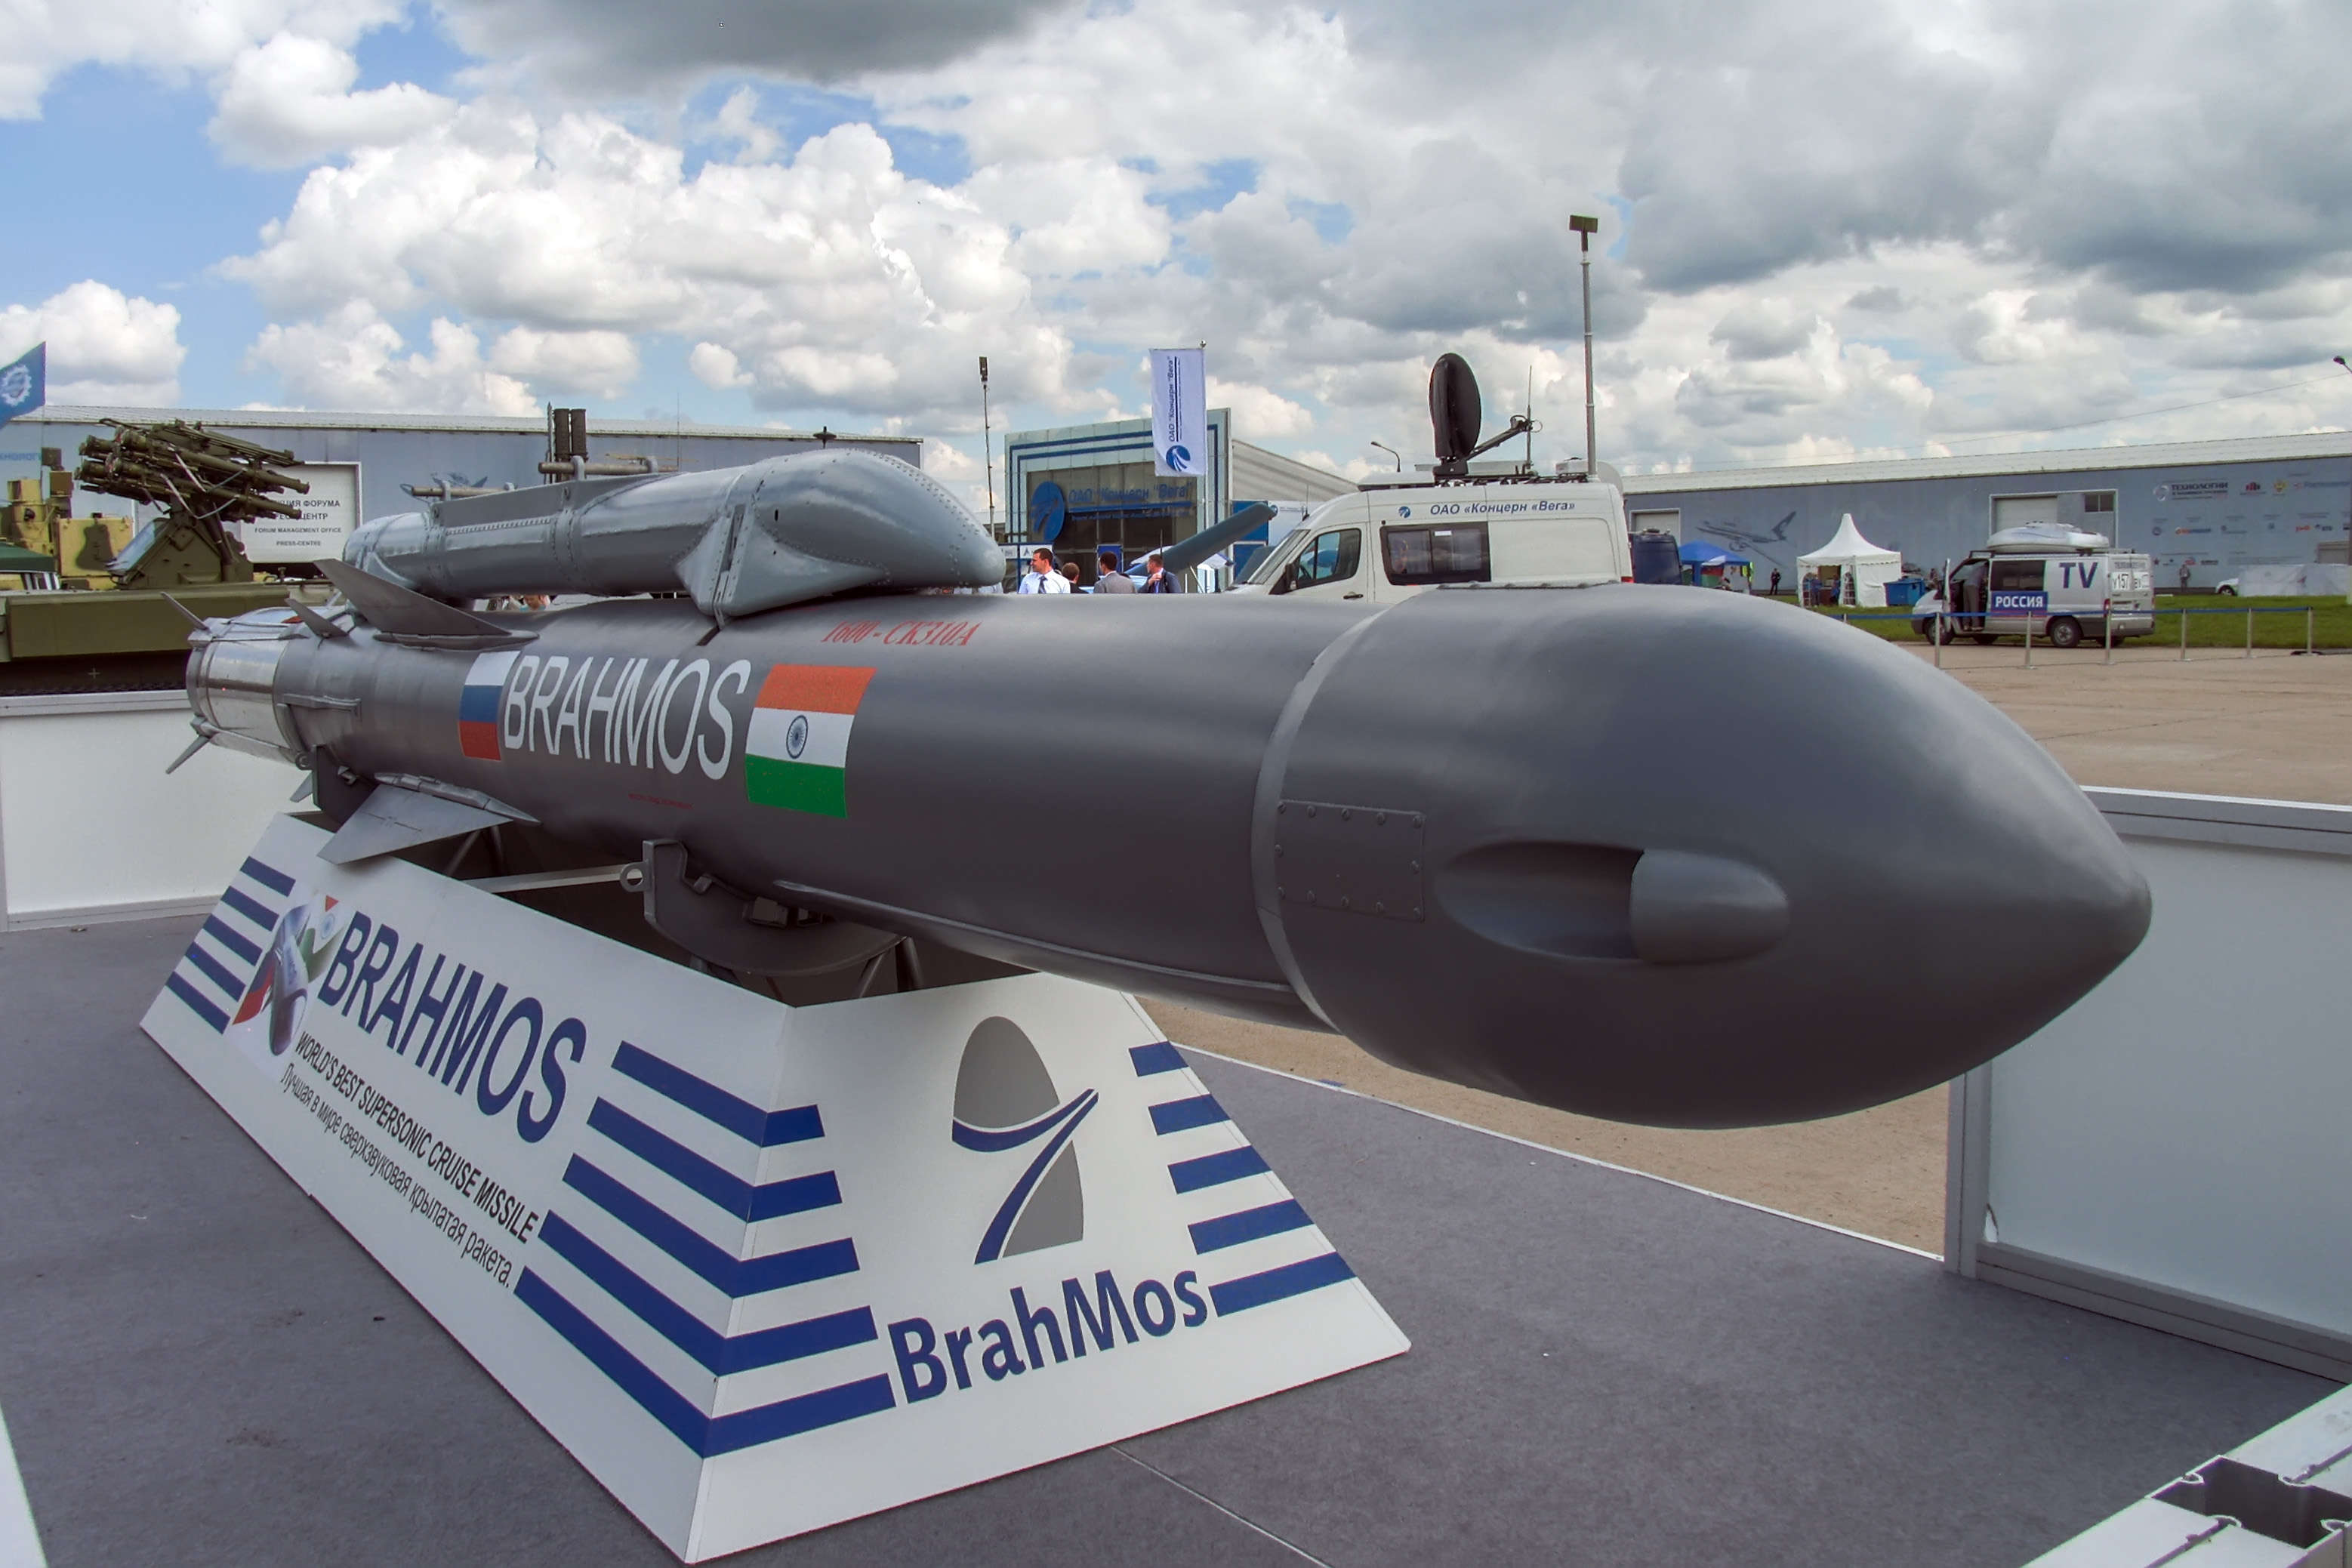 India successfully test fires the fastest supersonic cruise missile in